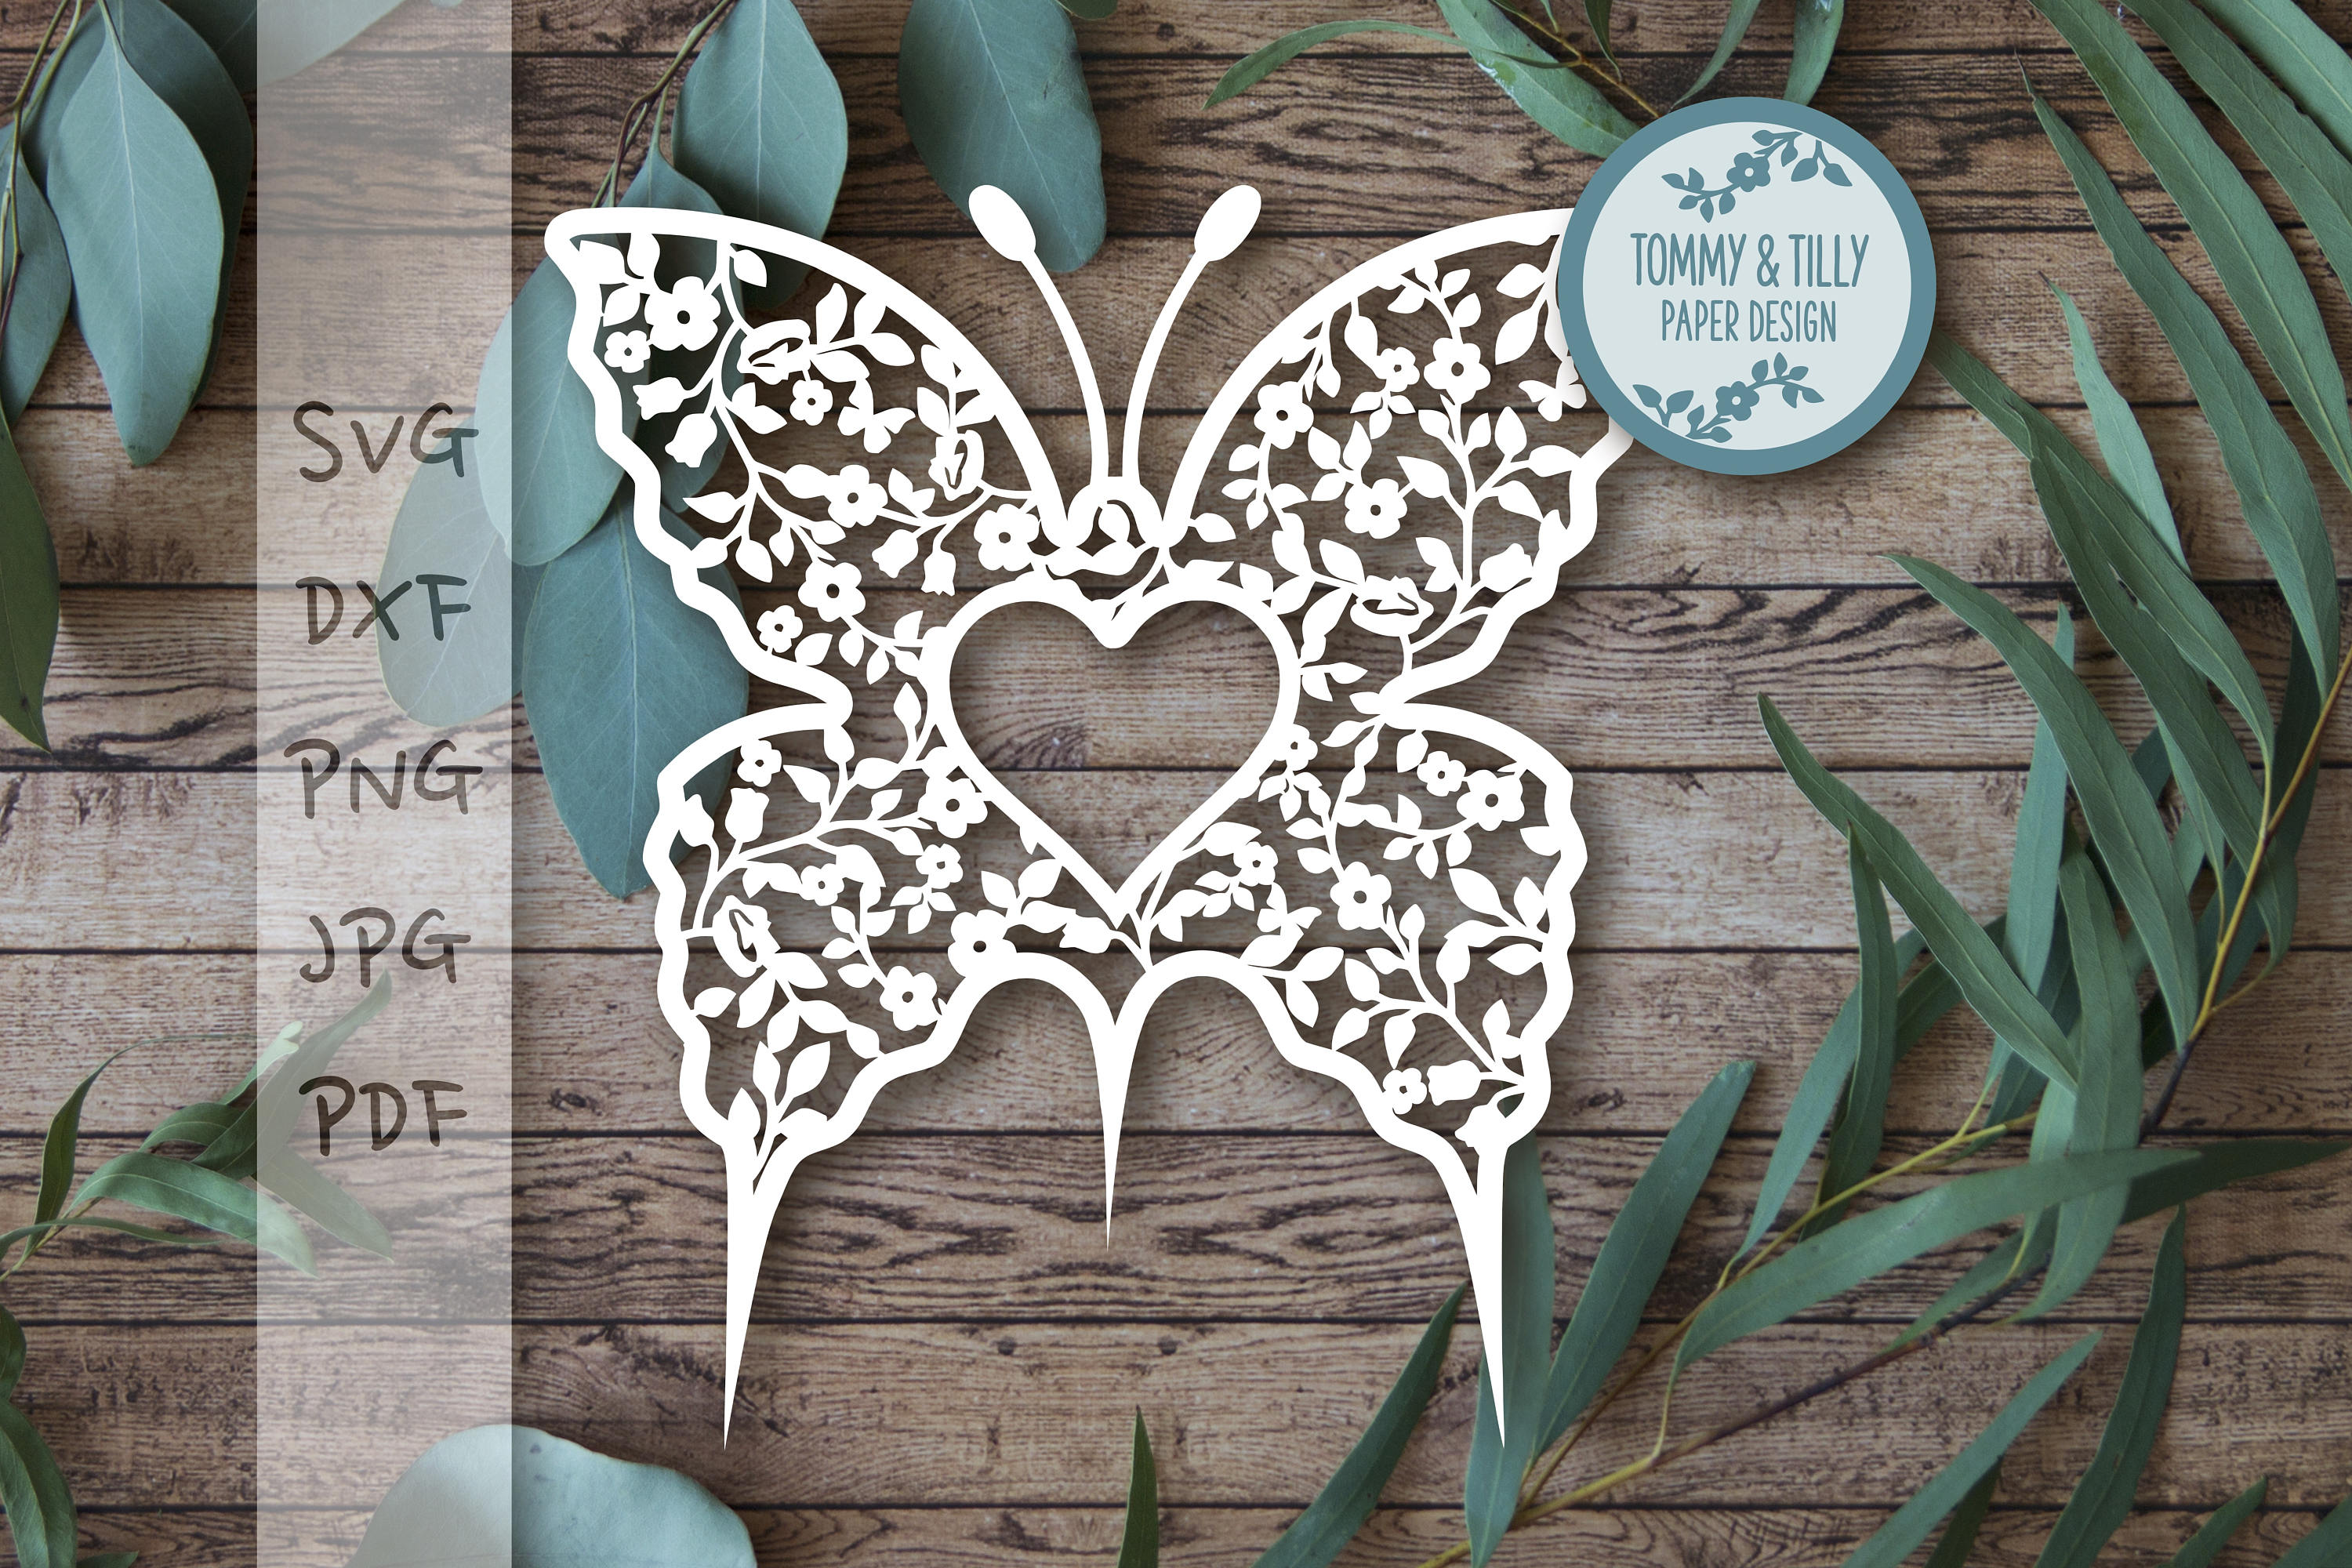 Download Vintage Flower Butterfly SVG PDF DXF Png Jpg Papercutting